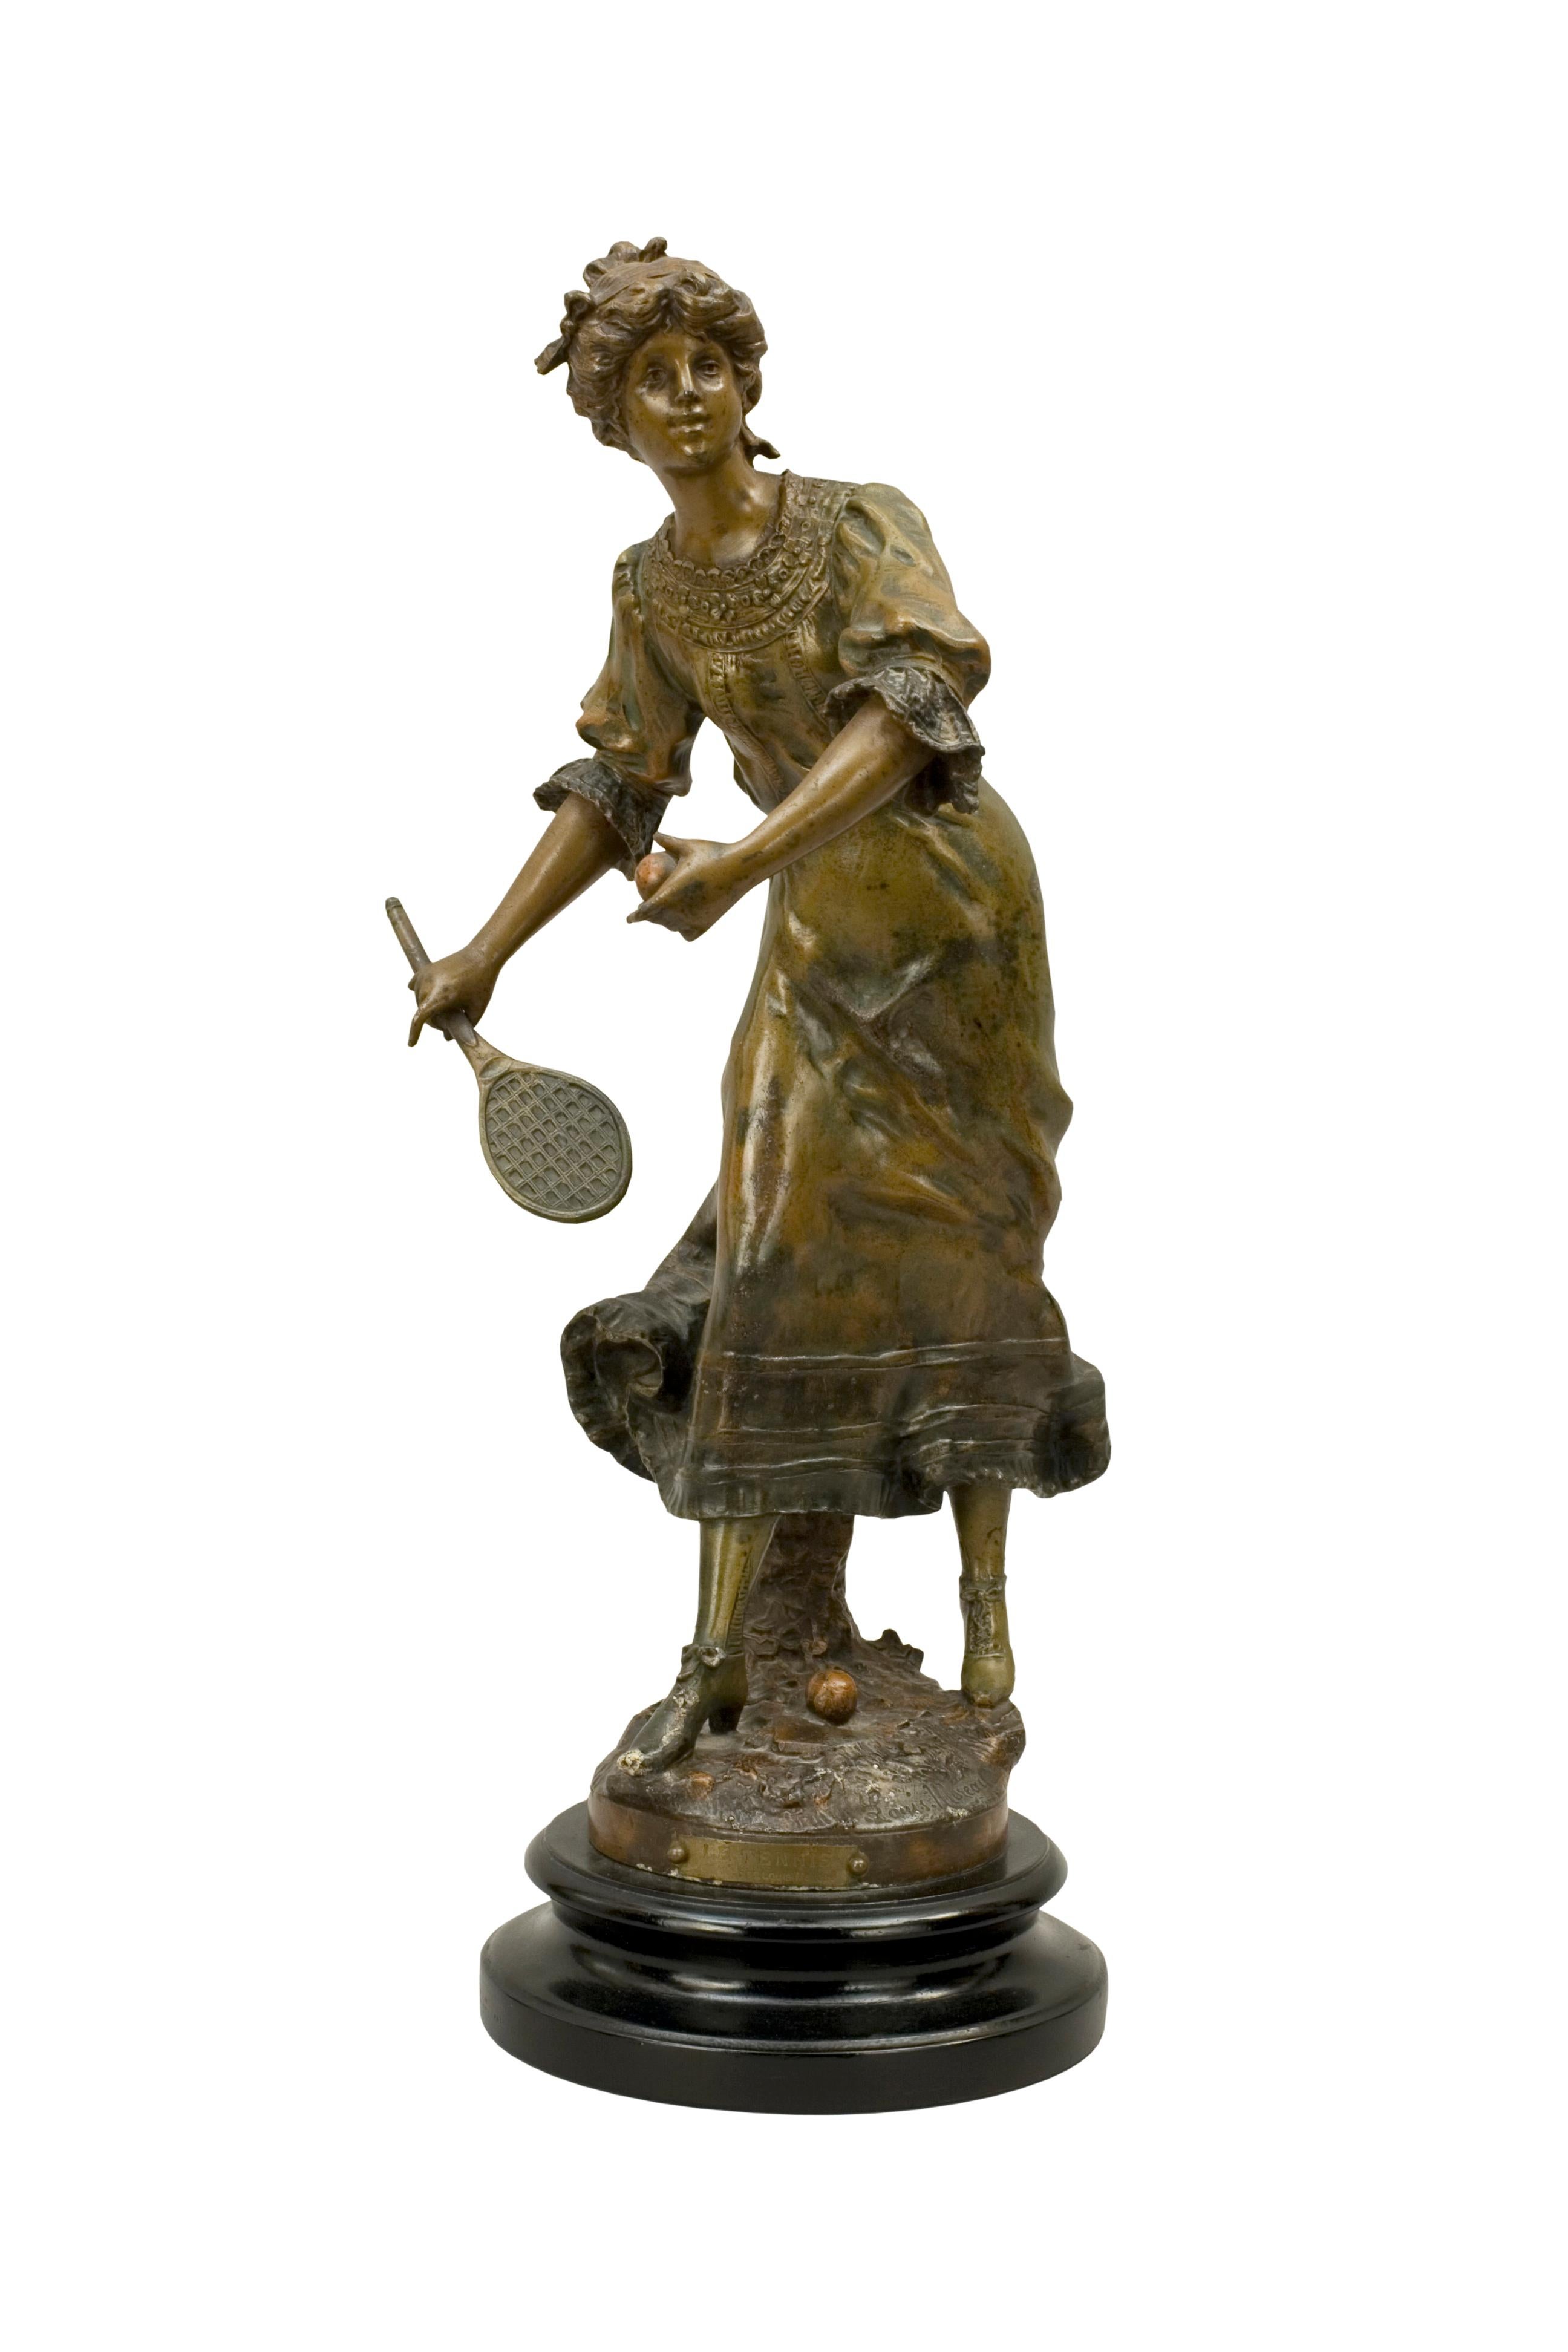 Le Tennis Par Louis Moreau, Spelter Tennis Statuettes.
A pair of large tennis player sculptures, one male and one female, made in spelter after Louis Moreau (1855-1919). Both players are holding lawn tennis rackets, the lady also holding a tennis